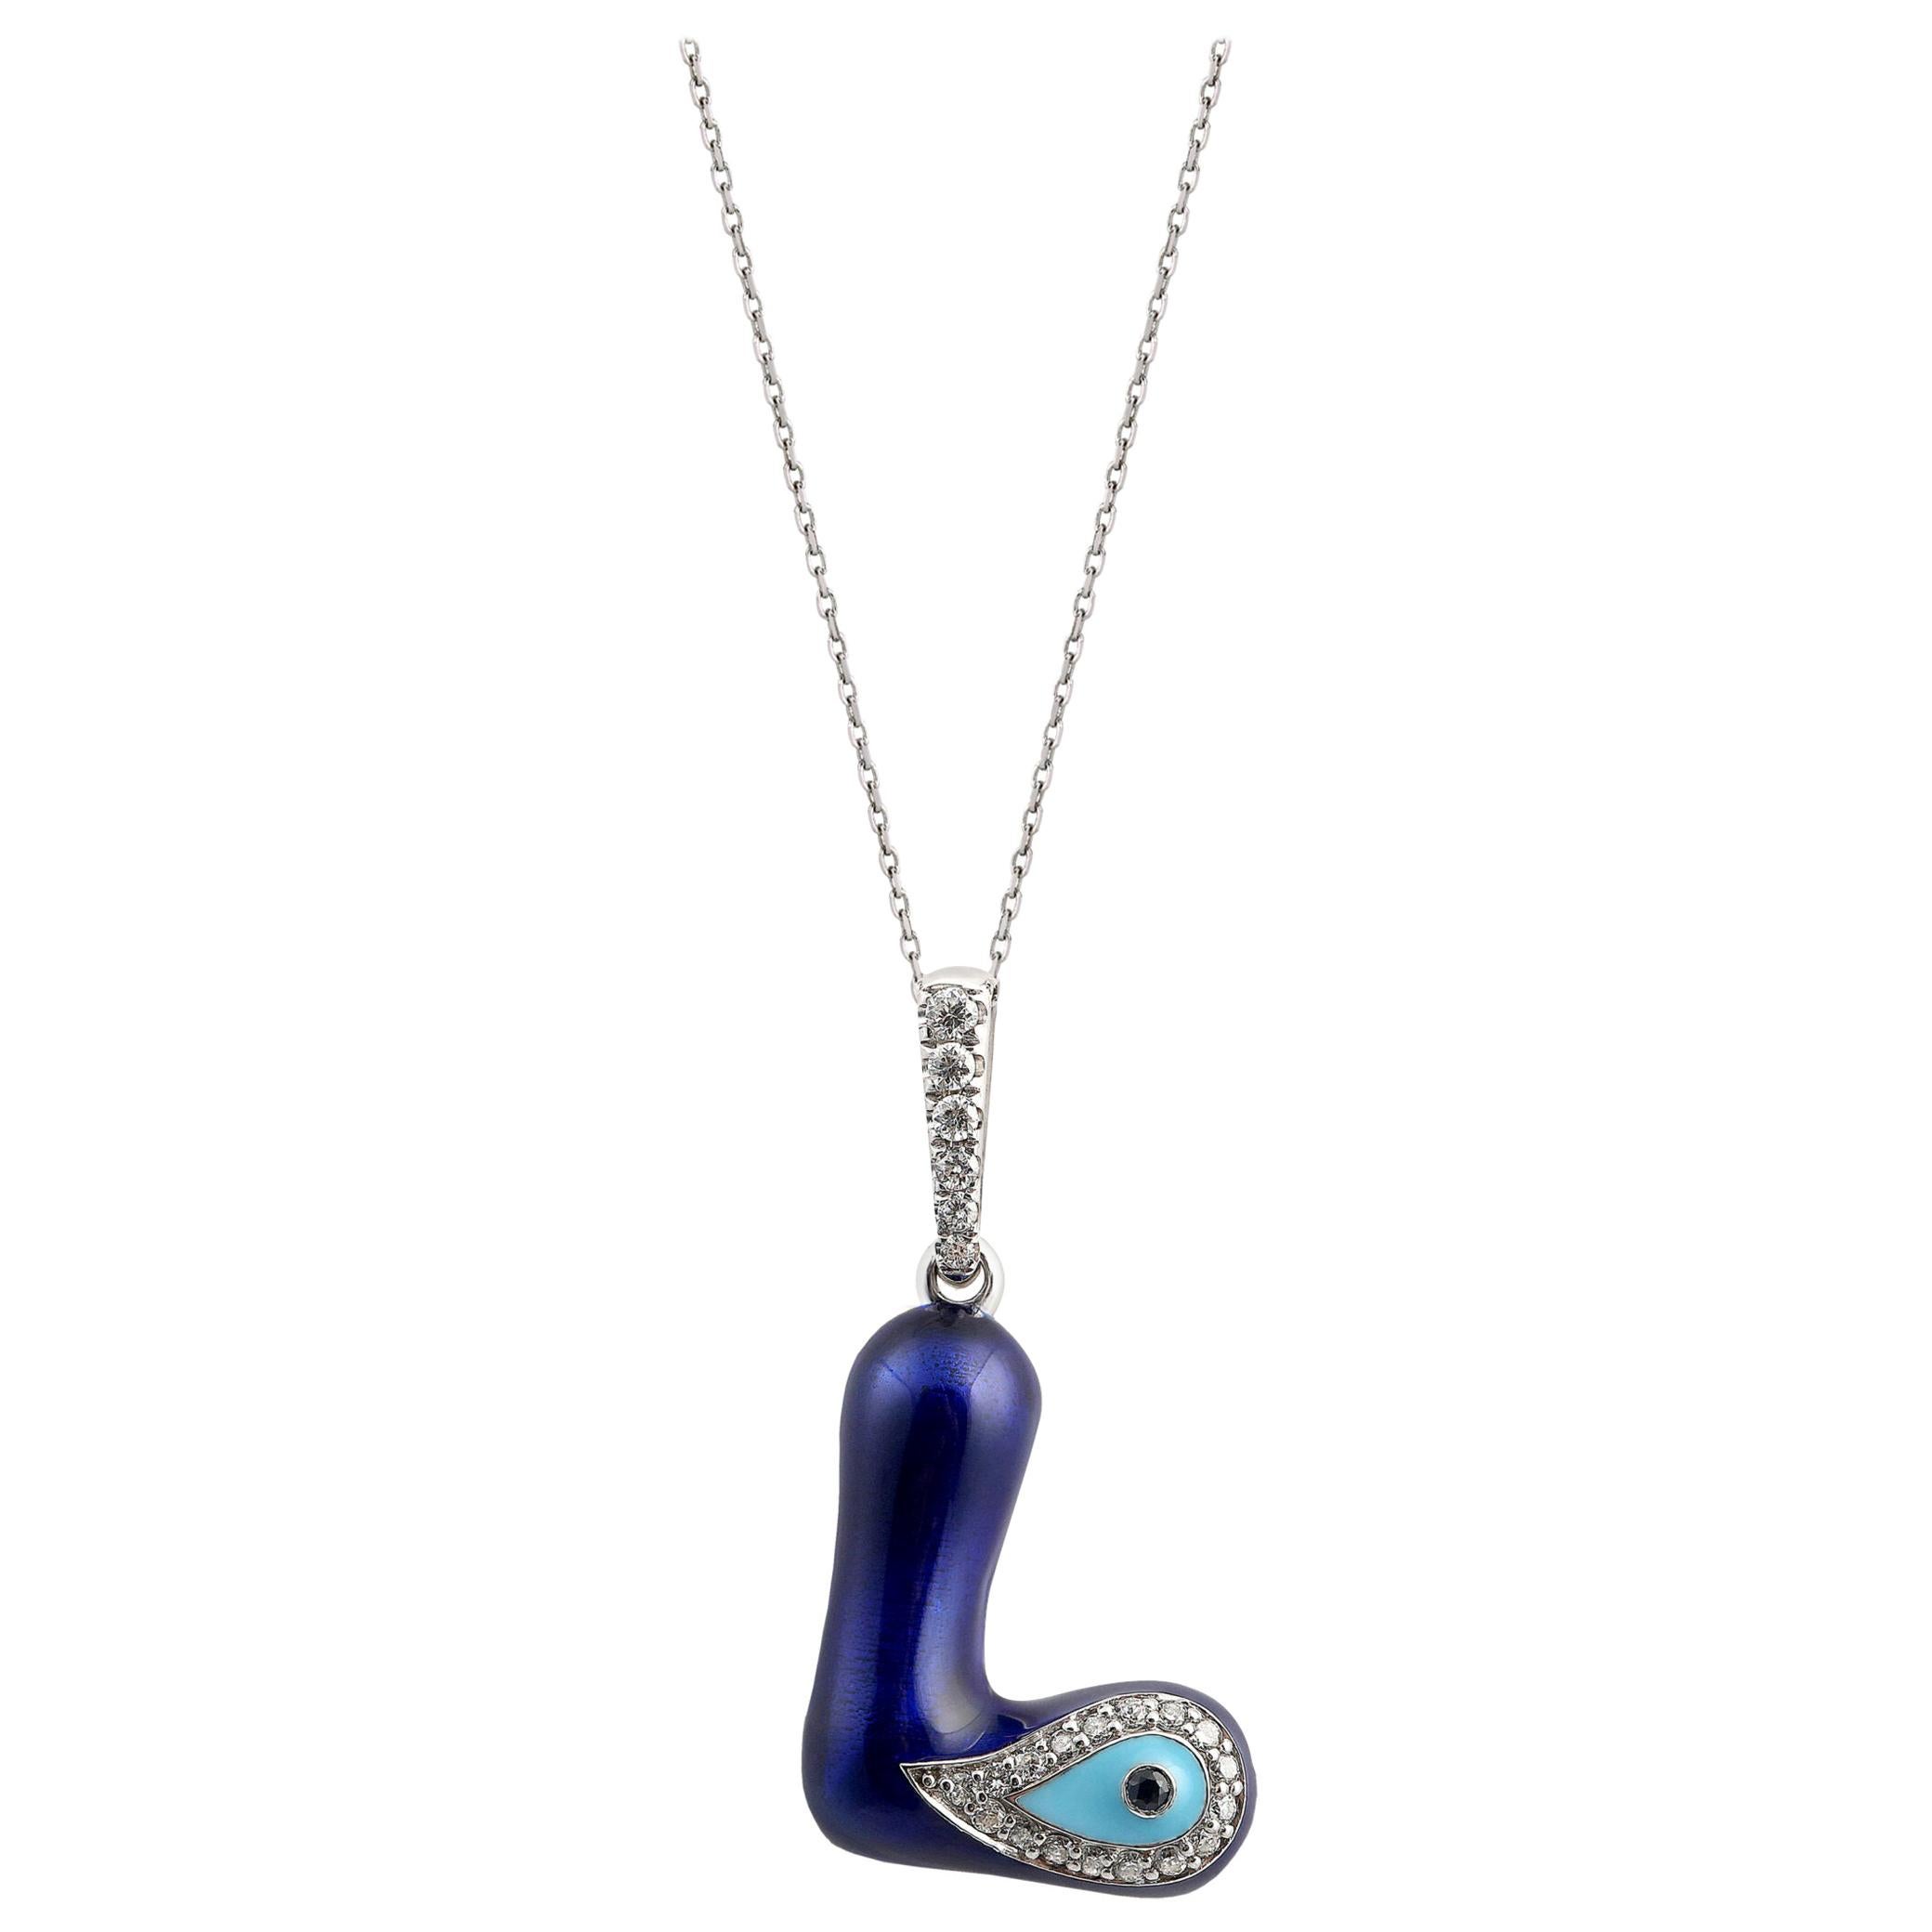 Design Your Nazarlique New Diamond Letter L Evil Eye Initial Charm Necklace And Tell Your Story.
Letter From Evil Eye Charms Allows You To Create A Personalized Necklace By Adding The Letters You Love.

* 14K White Gold Enamel Initial ‘L’ Pendant
*